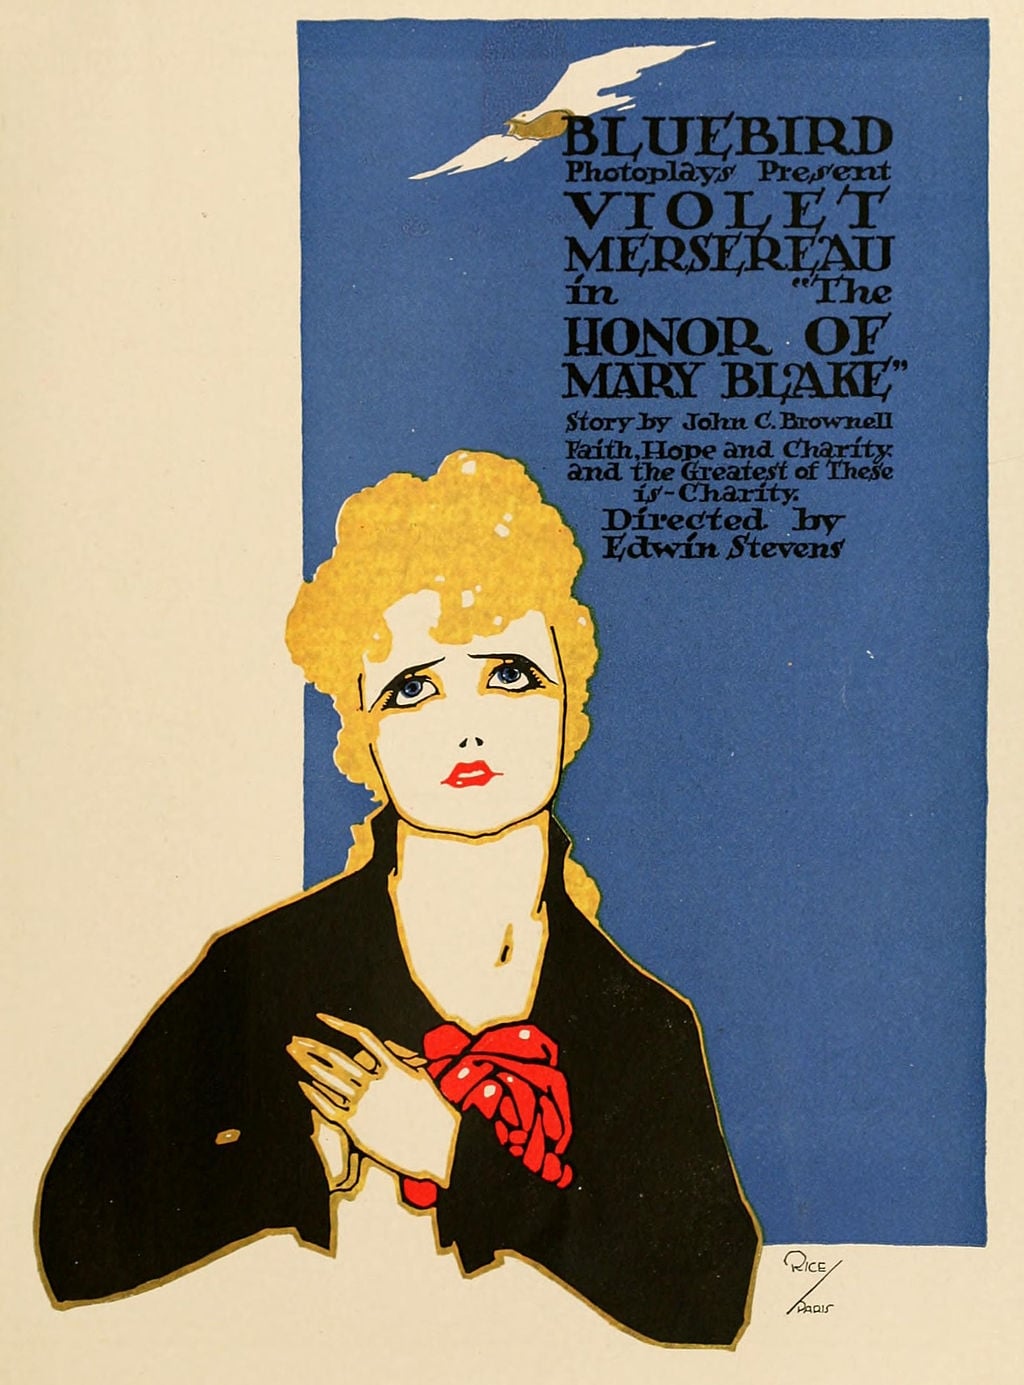 The Honor of Mary Blake